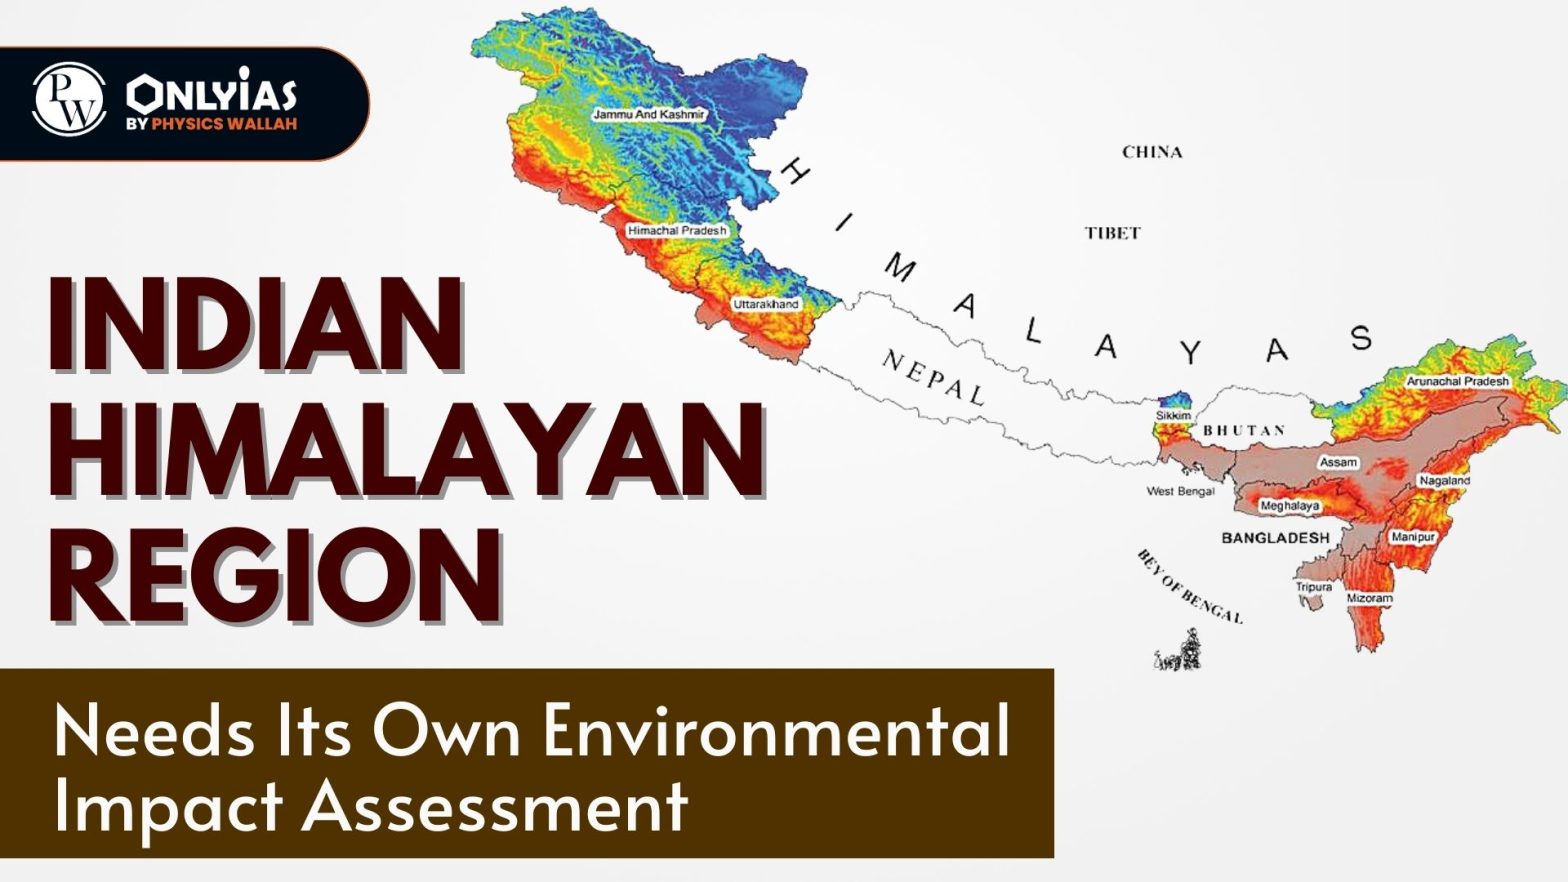 Indian Himalayan Region Needs Its Own Environmental Impact Assessment